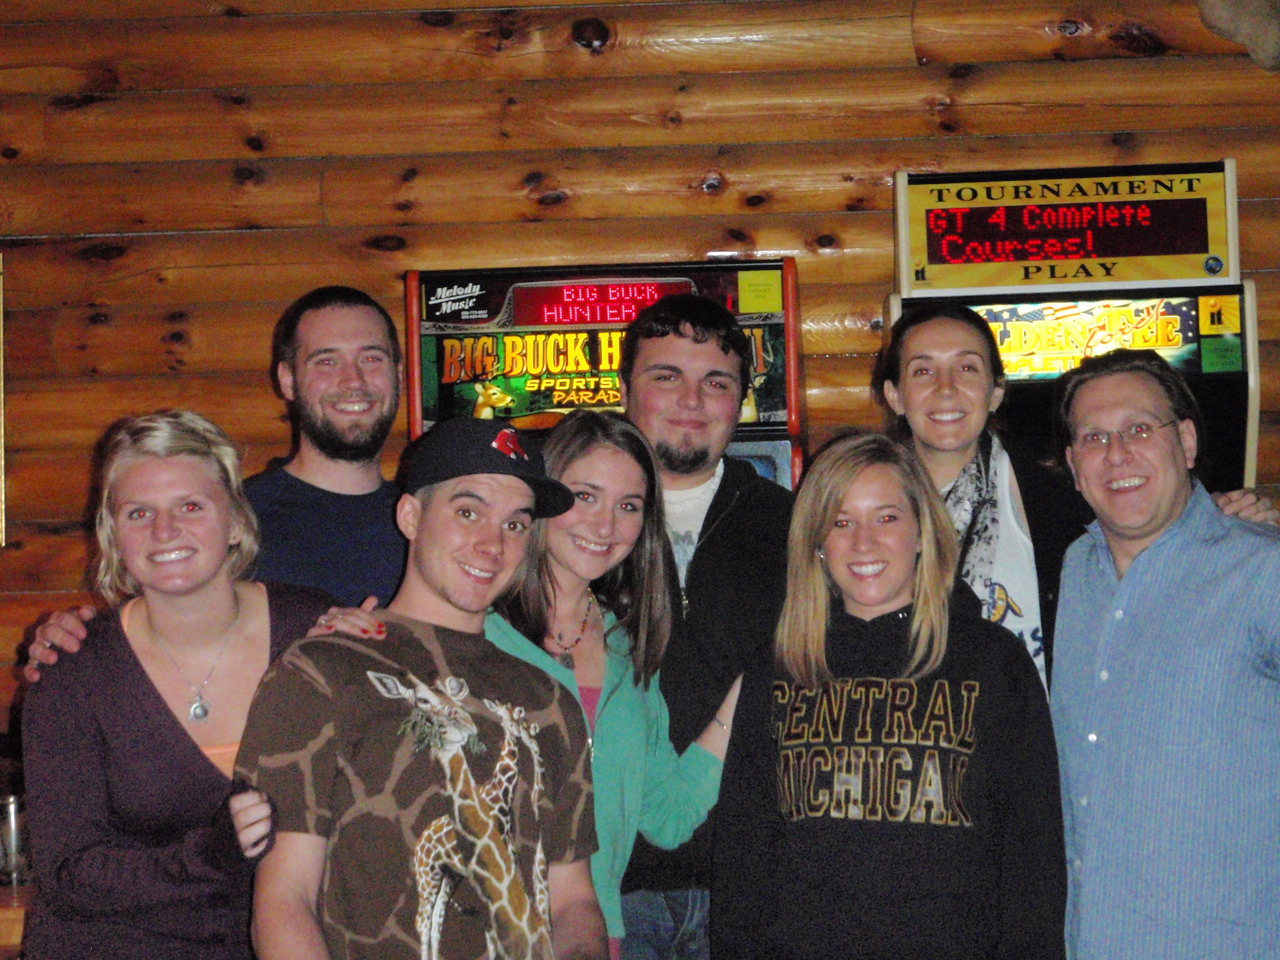 Me and Pam with the Central Michigan University Gang!  We had an awesome dinner at The Cabin in Mt. Pleasant, MI.  